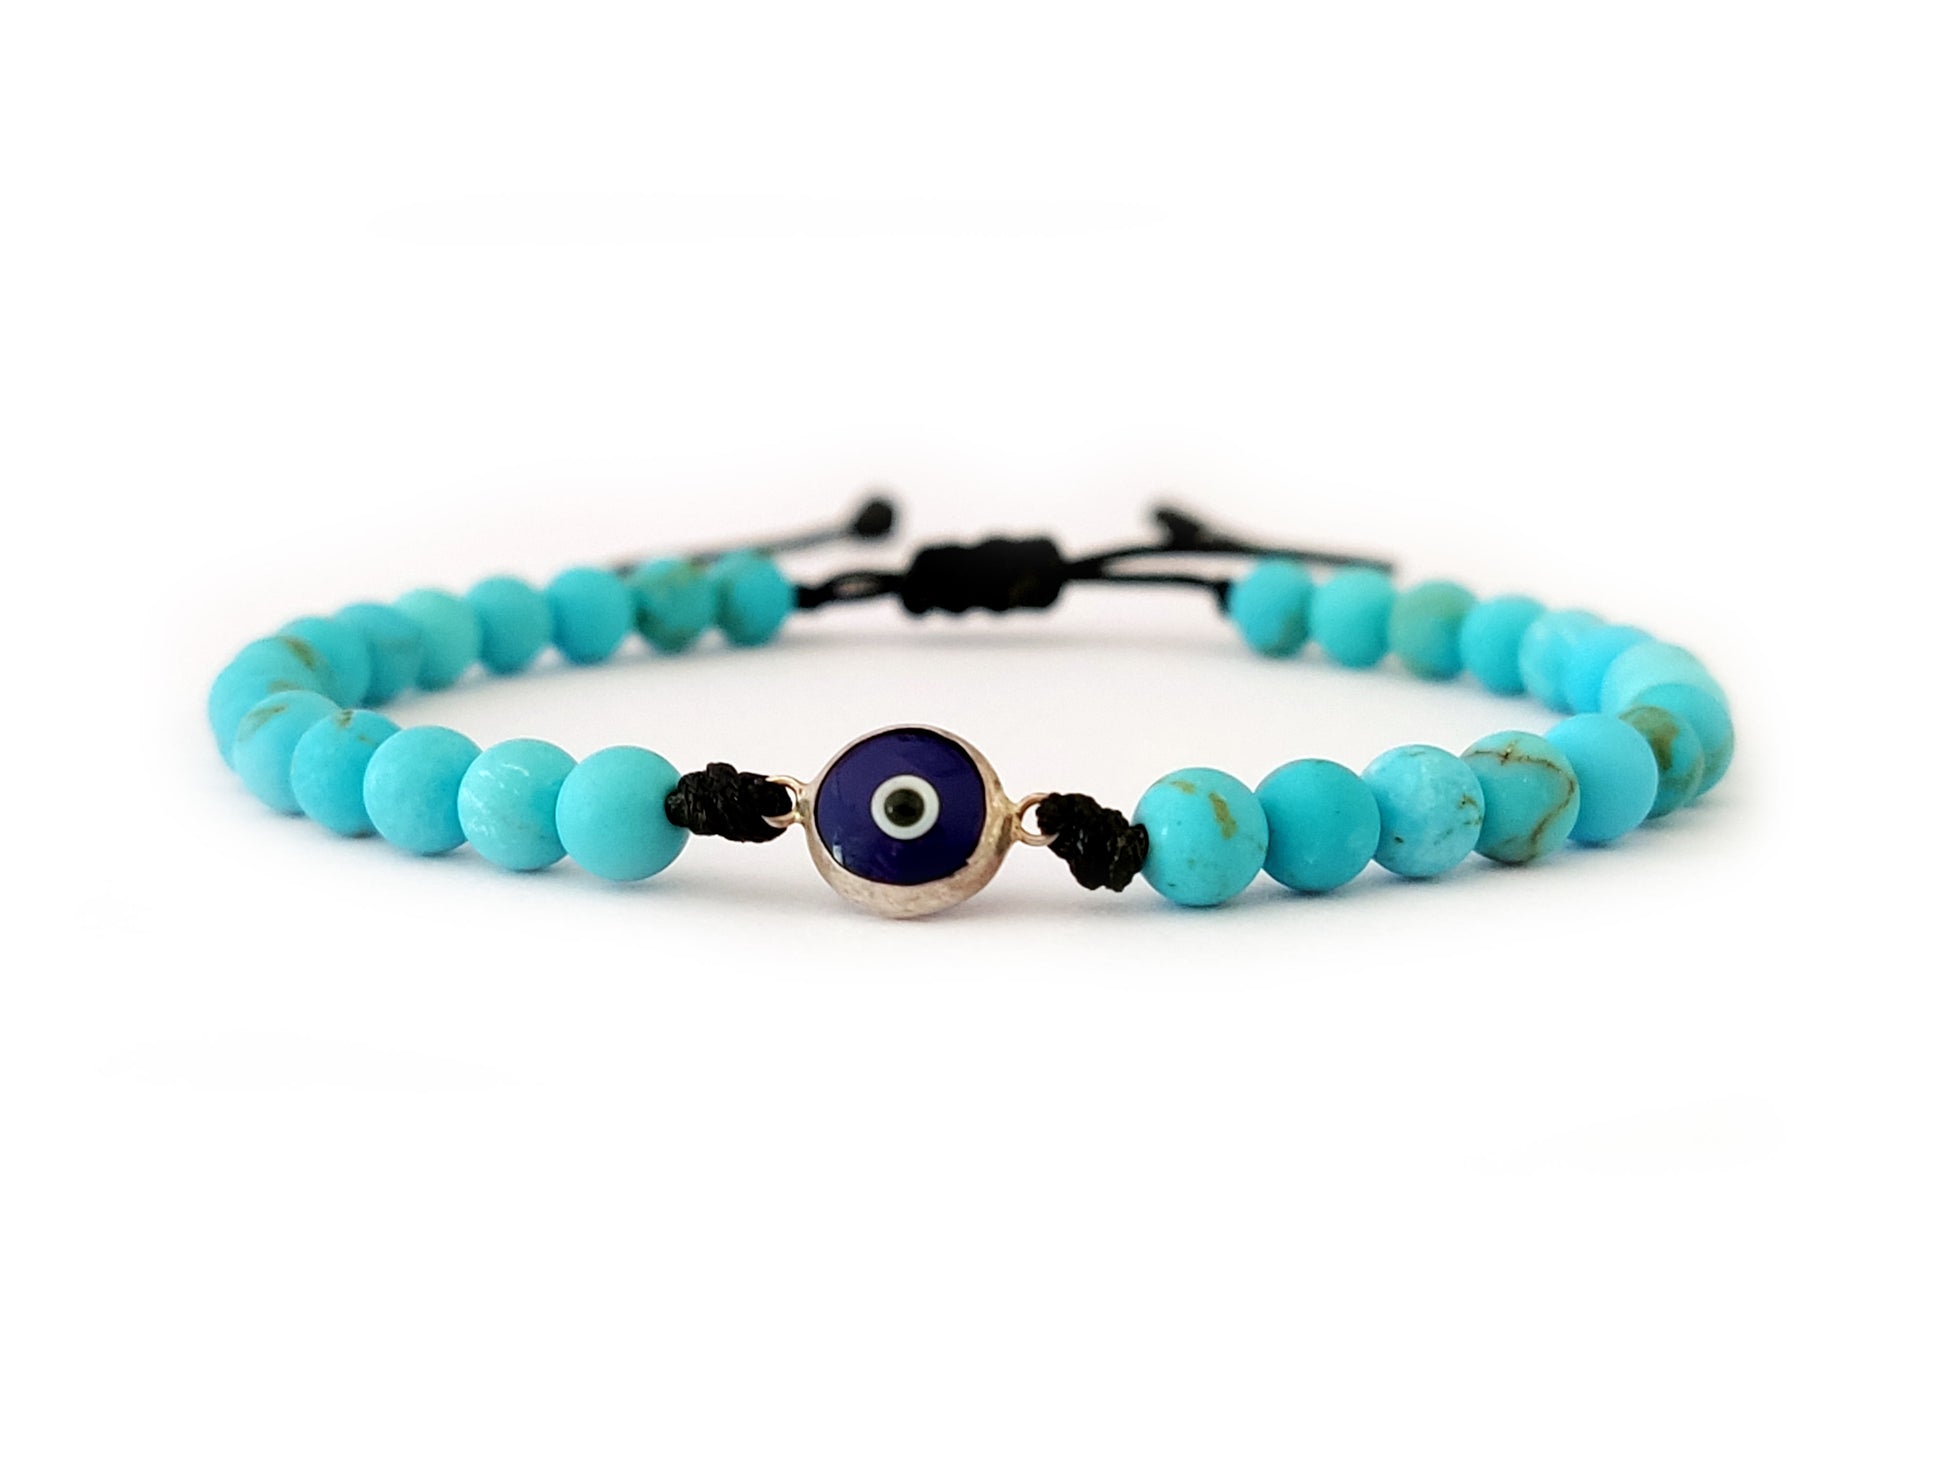 Close-up image of a Silver 925 Evil Eye Bracelet with a 6 mm Evil Eye charm, 4 mm Natural Turquoise stones, and a Slide Macrame Clasp. Handcrafted in Greece, this bracelet combines elegance and protective symbolism, making it a unique and meaningful addition to your jewelry collection.